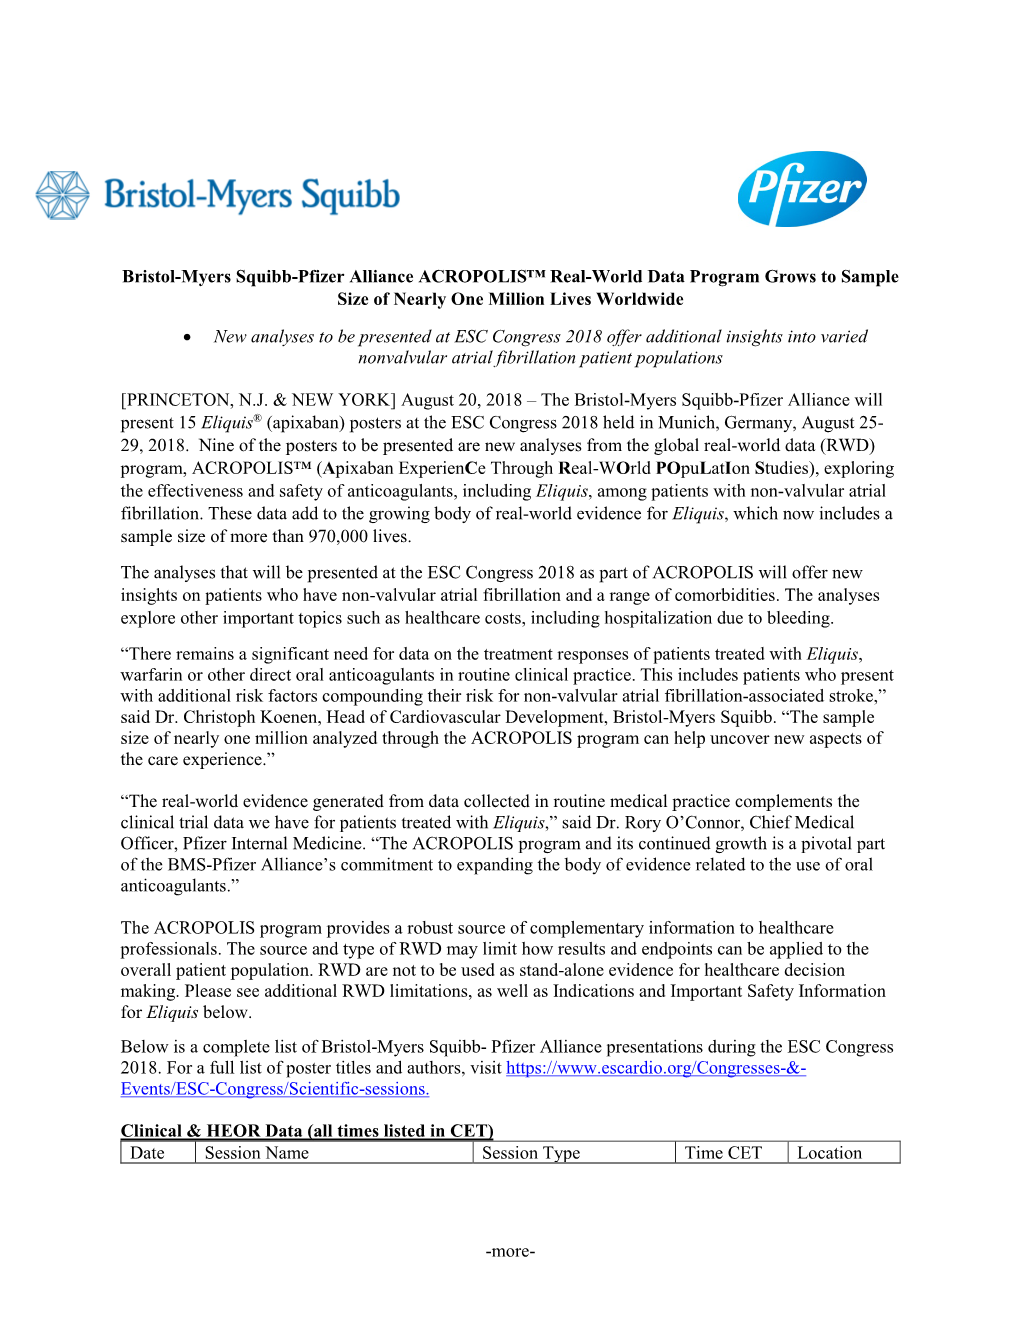 More- Bristol-Myers Squibb-Pfizer Alliance ACROPOLIS™ Real-World Data Program Grows to Sample Size of Nearly One Million Live